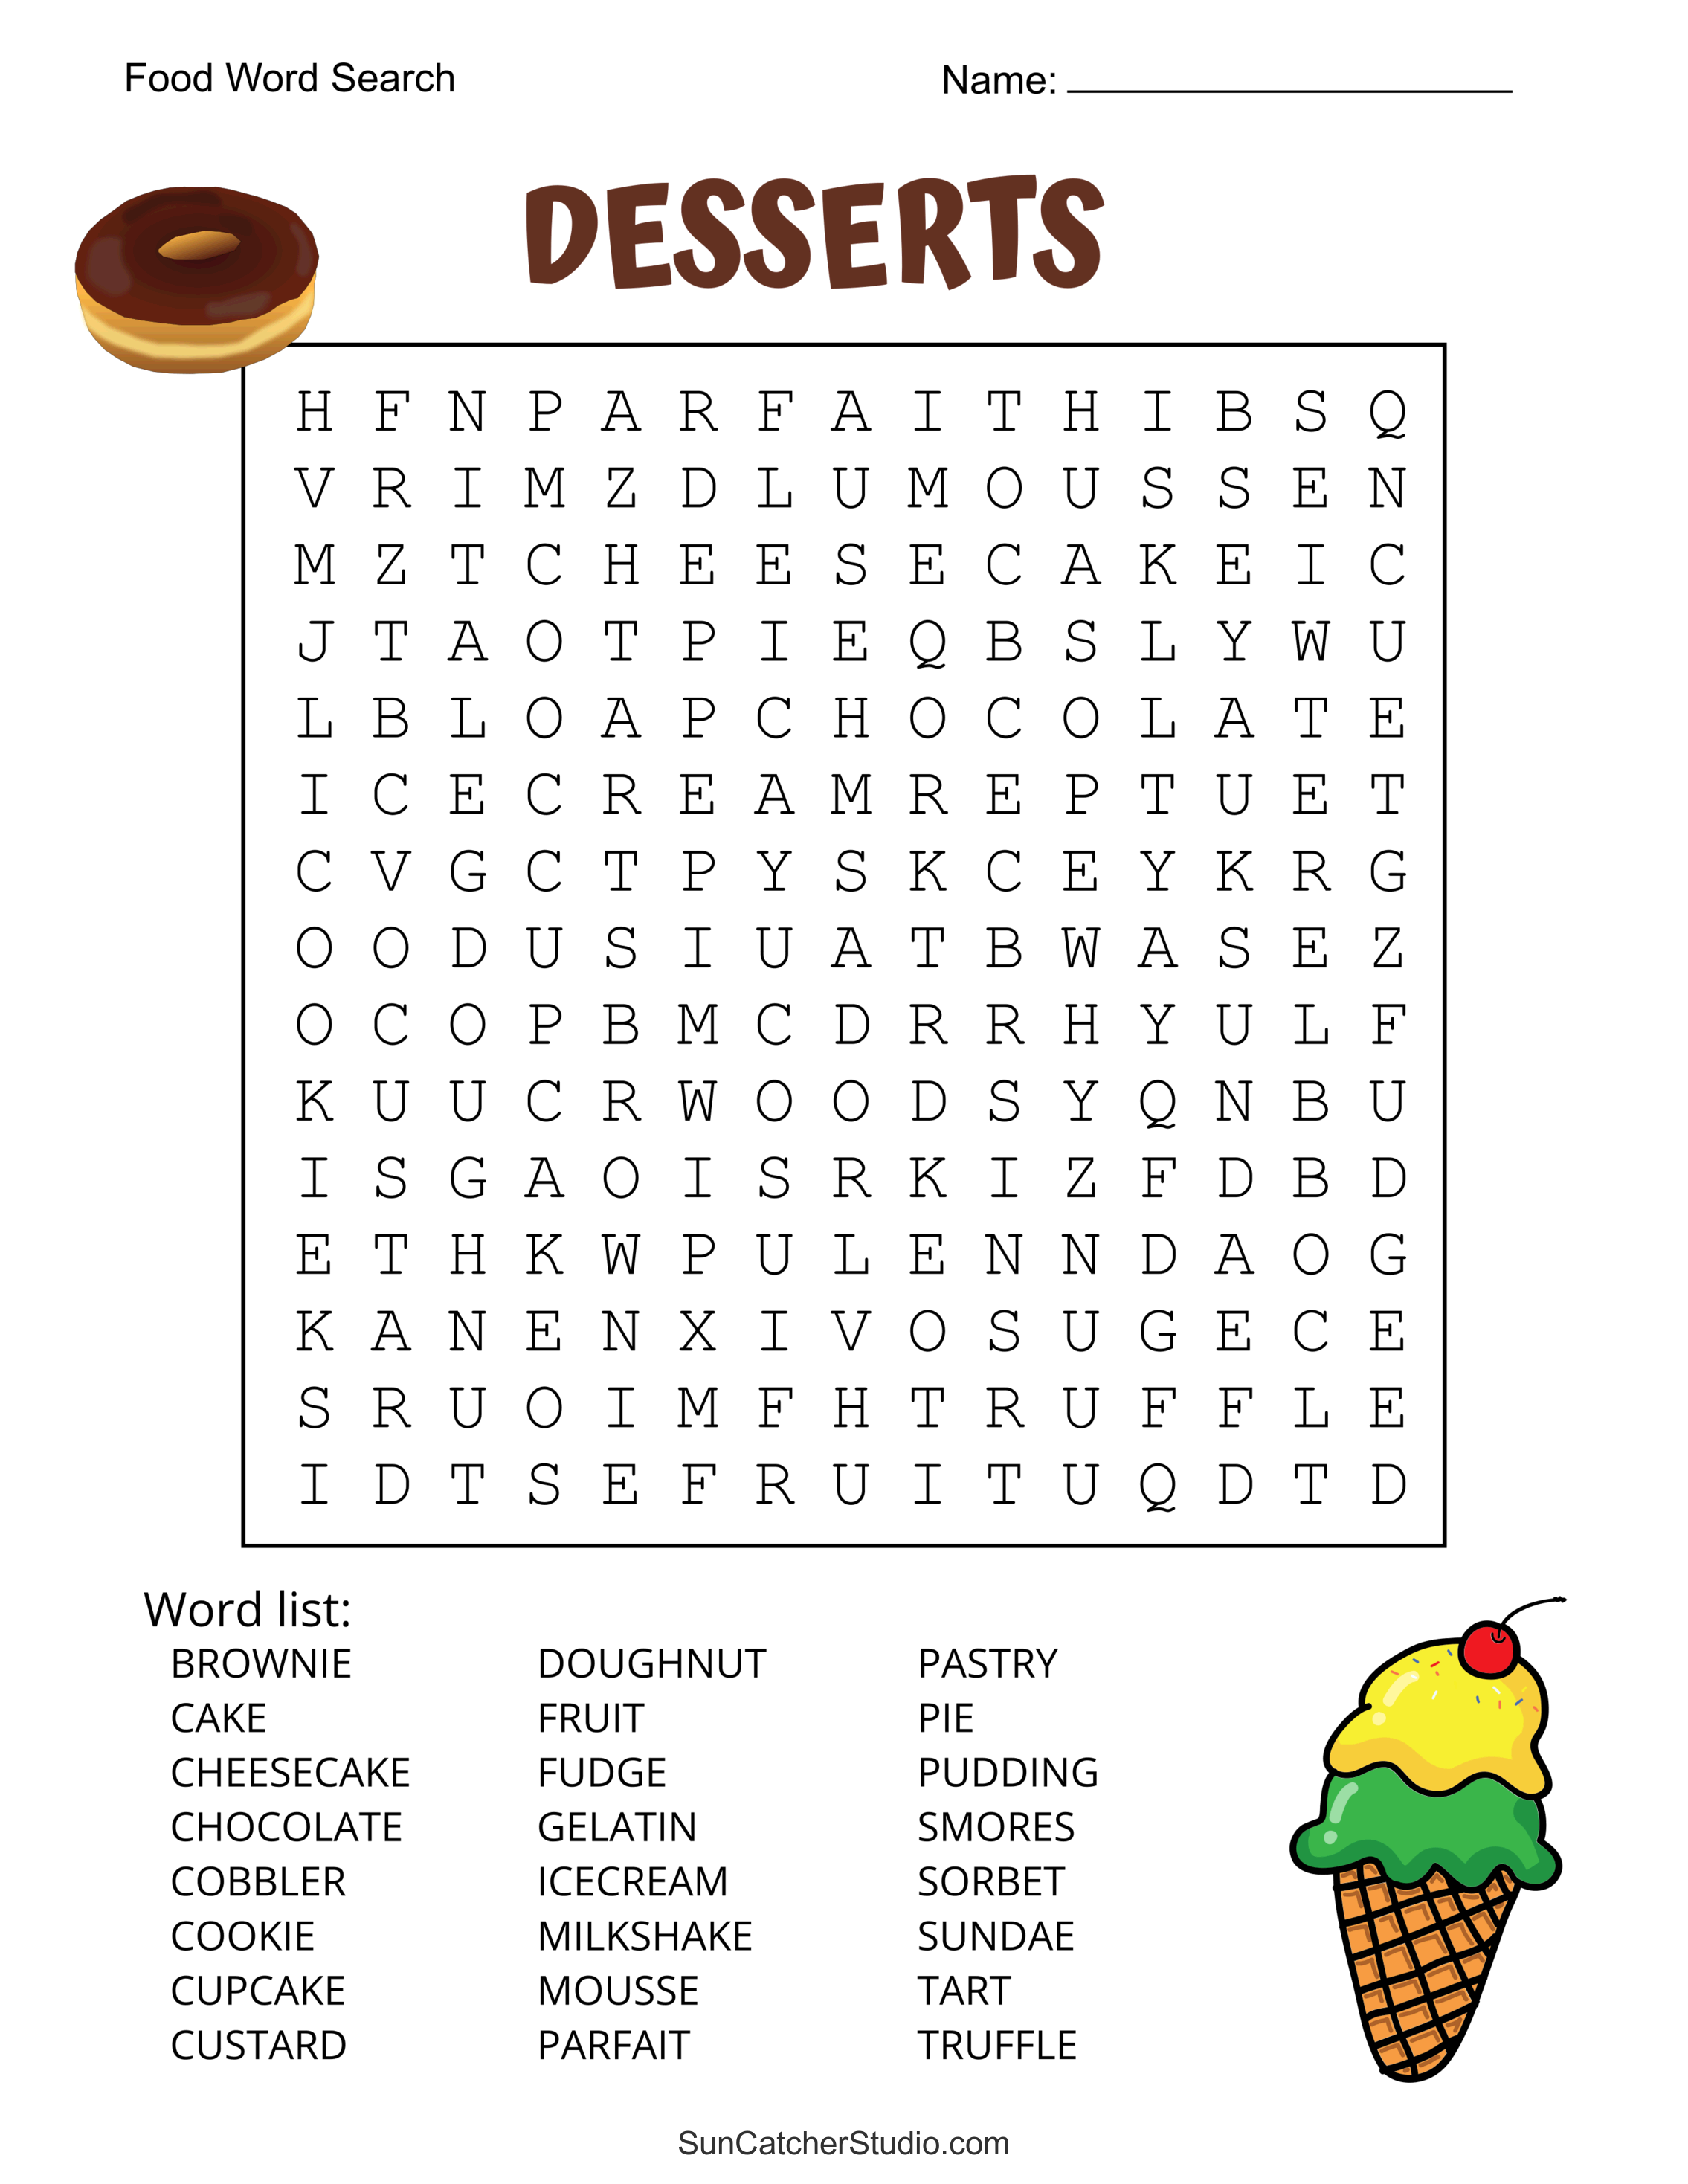 Food Word Search (Free Printable Puzzles) DIY Projects Patterns